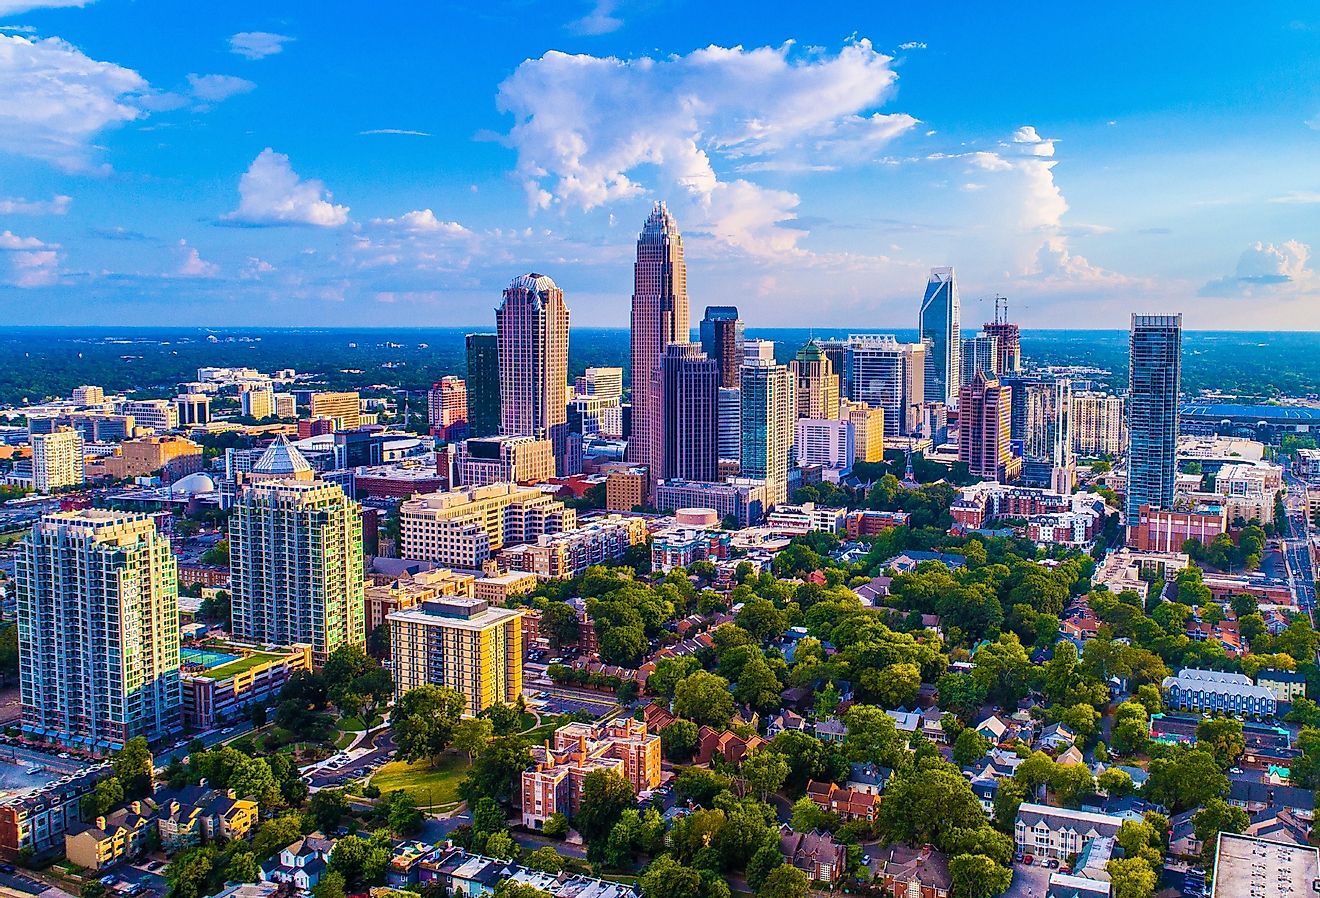 Charlotte North Carolina skyline on a bright sunny day with a few clouds in the sky.